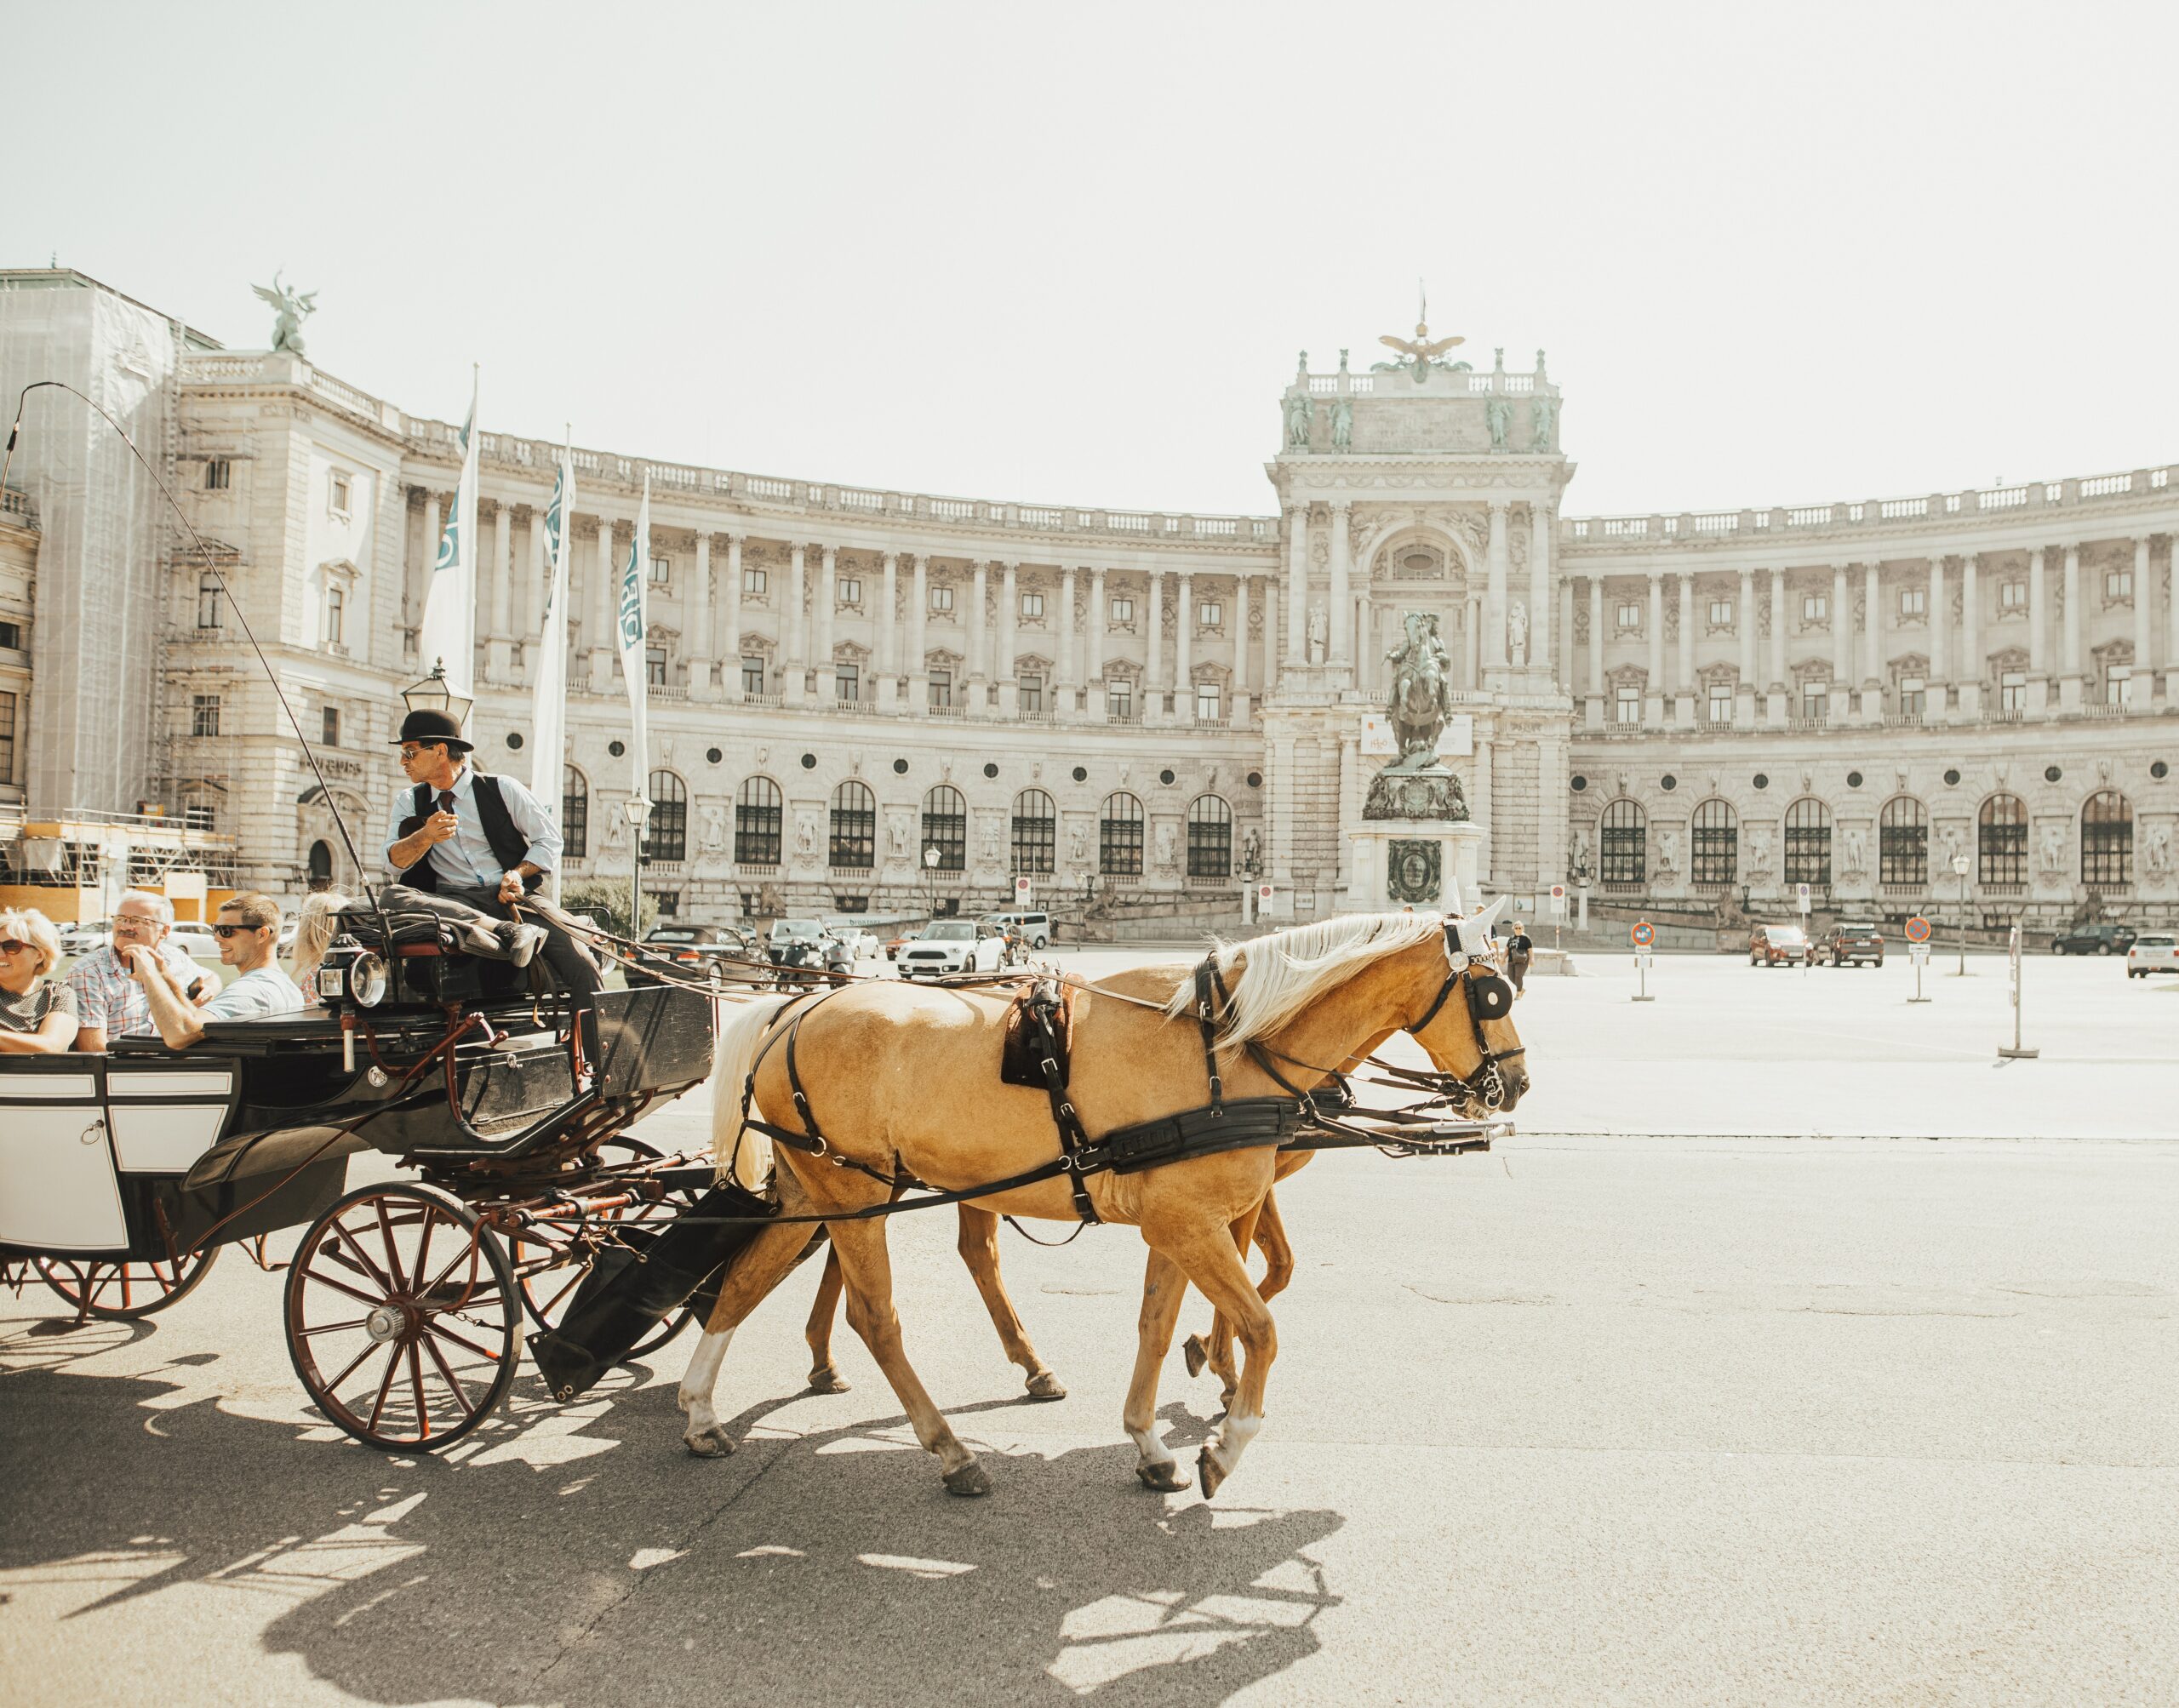 town square in Vienna with a horse carriage